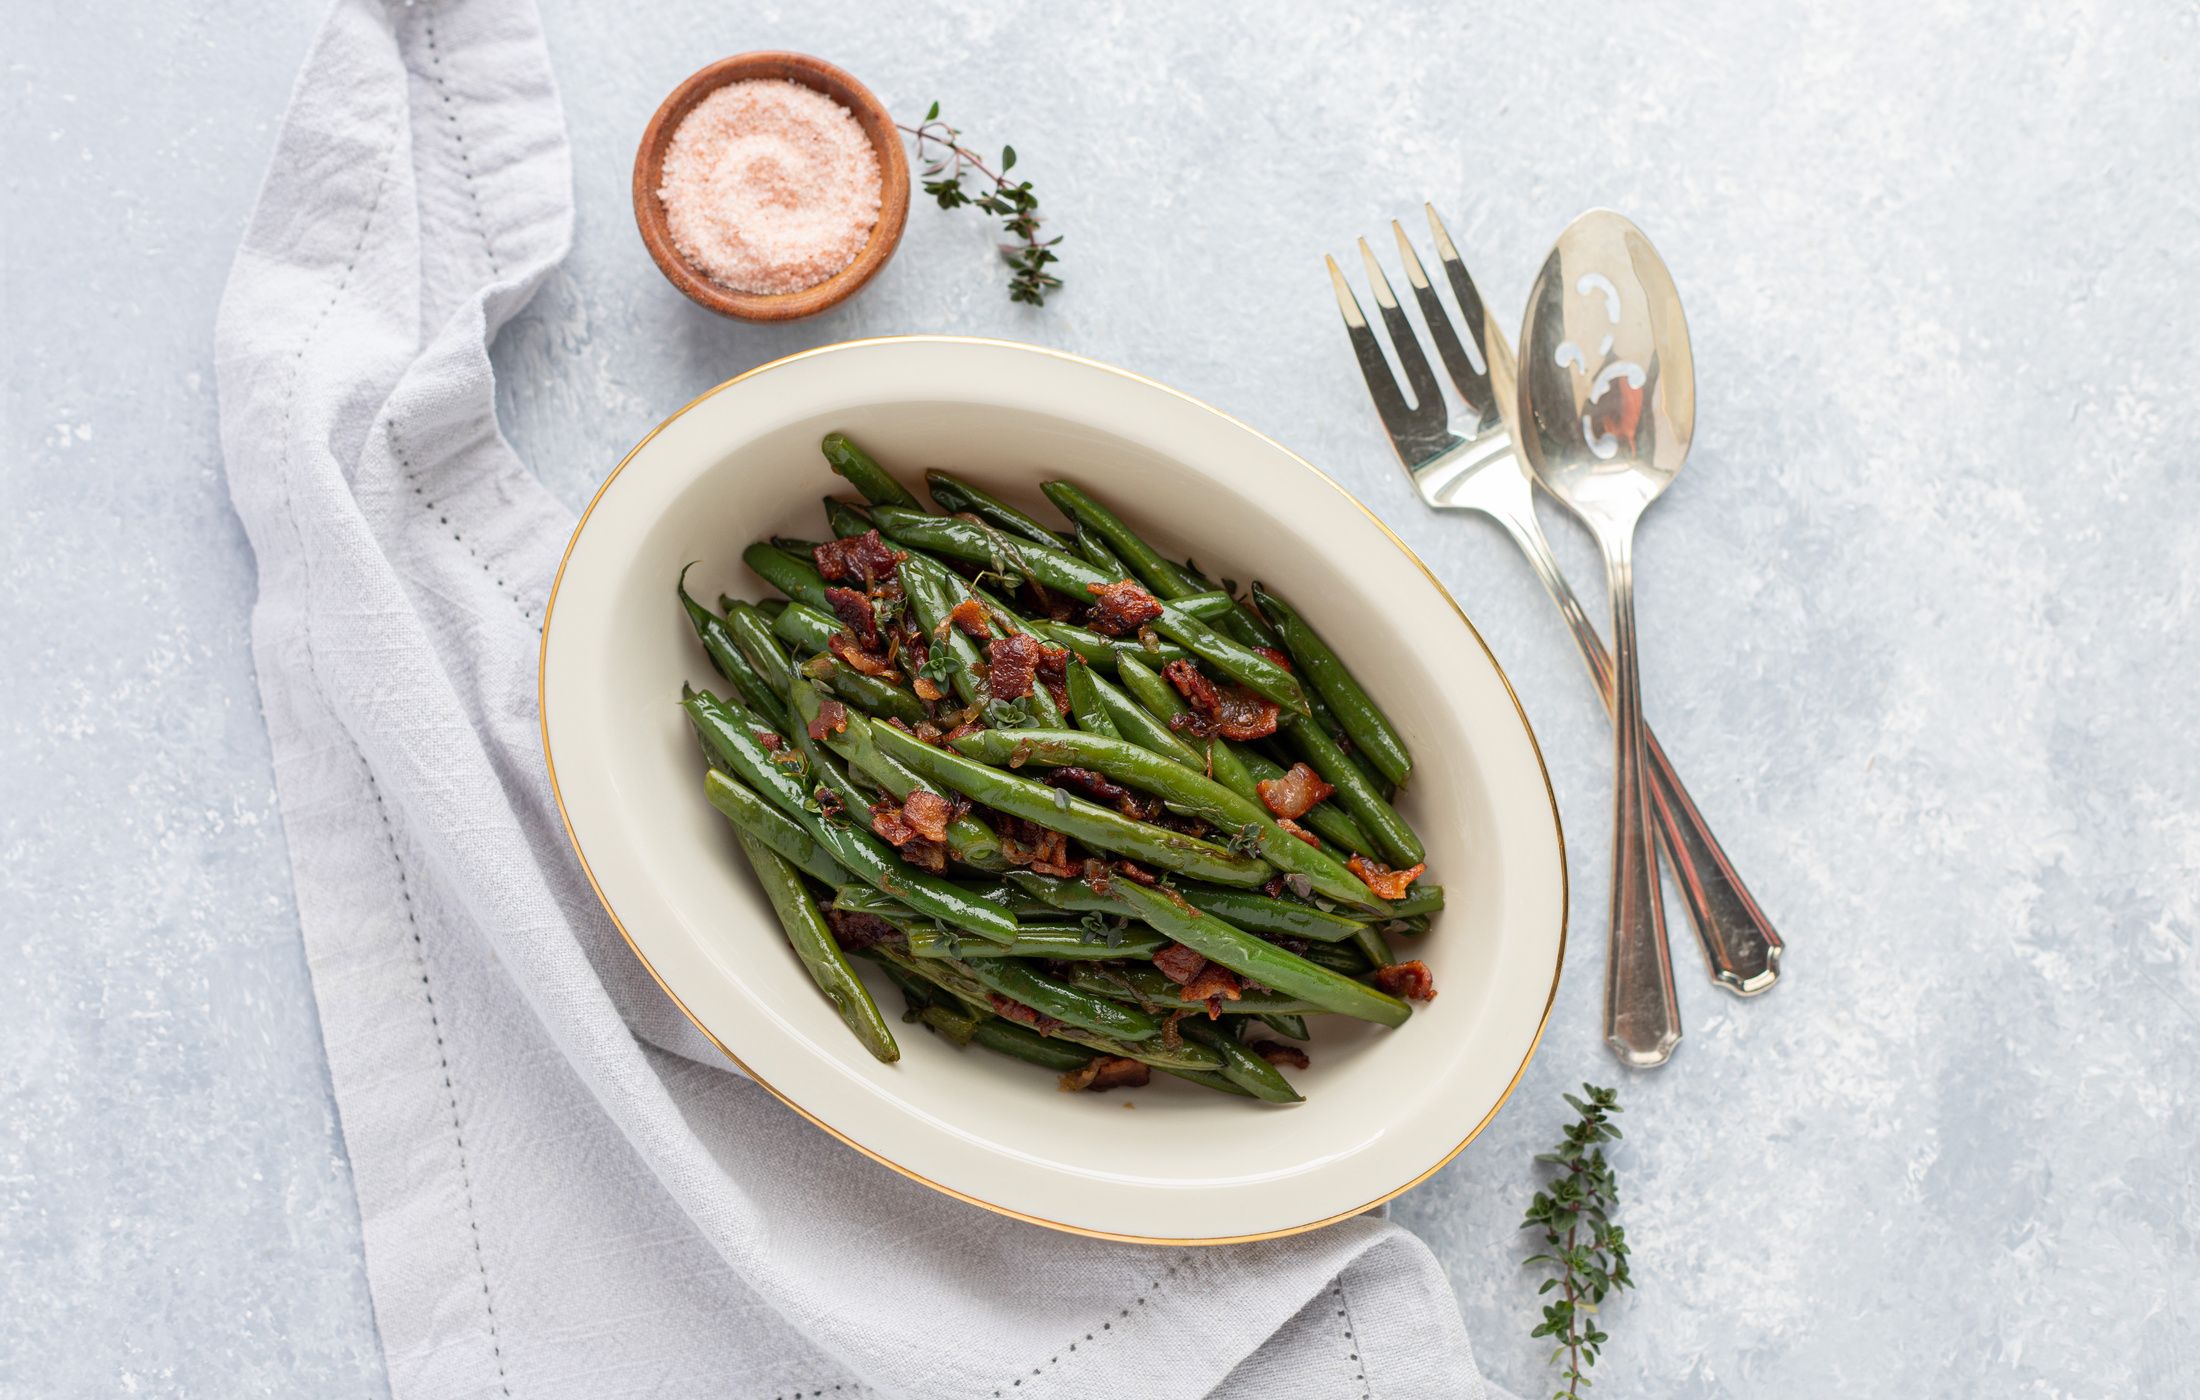 Braised Green Beans with Bacon and Caramelized Shallots